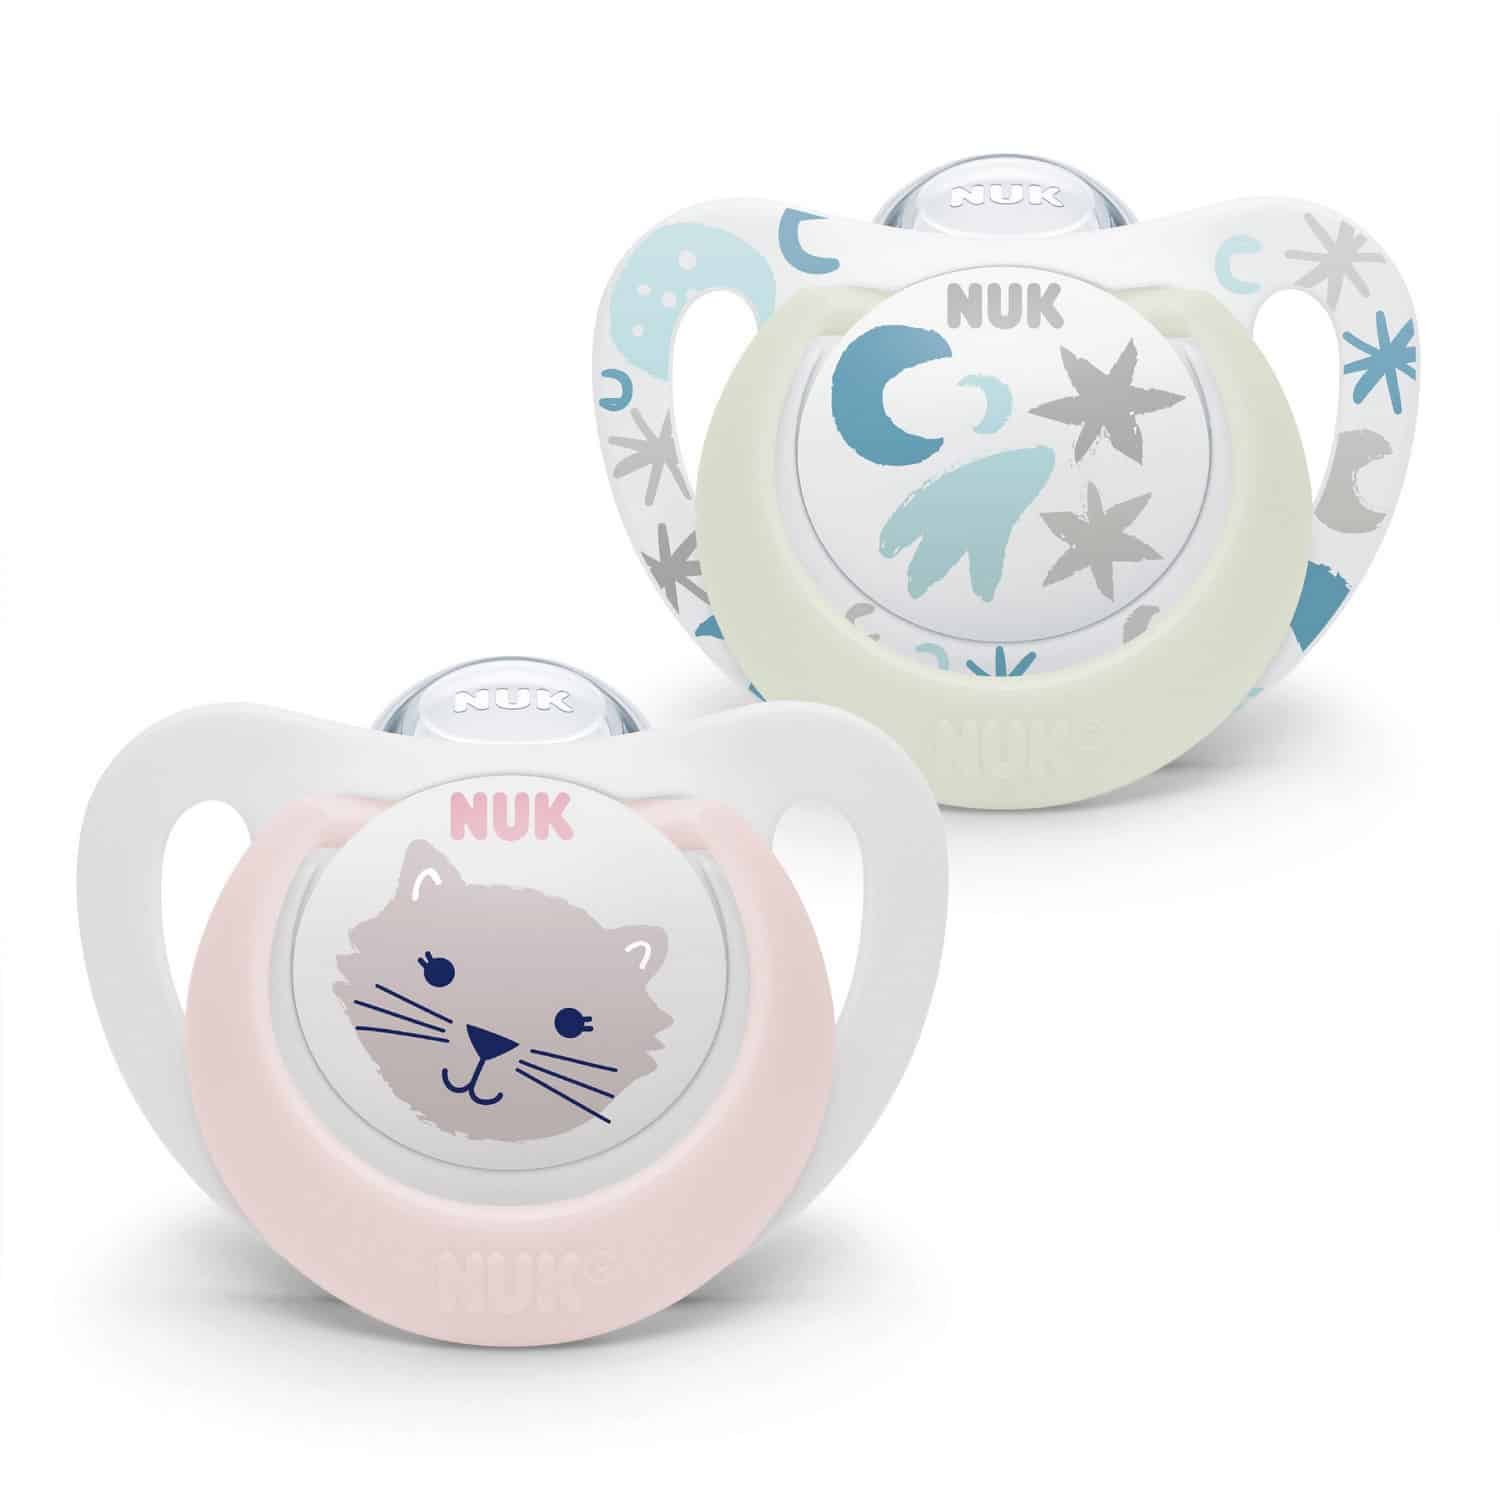 Nuk Sucette Silicone Star Day & Night 0-6 mois Chat/Etoiles 